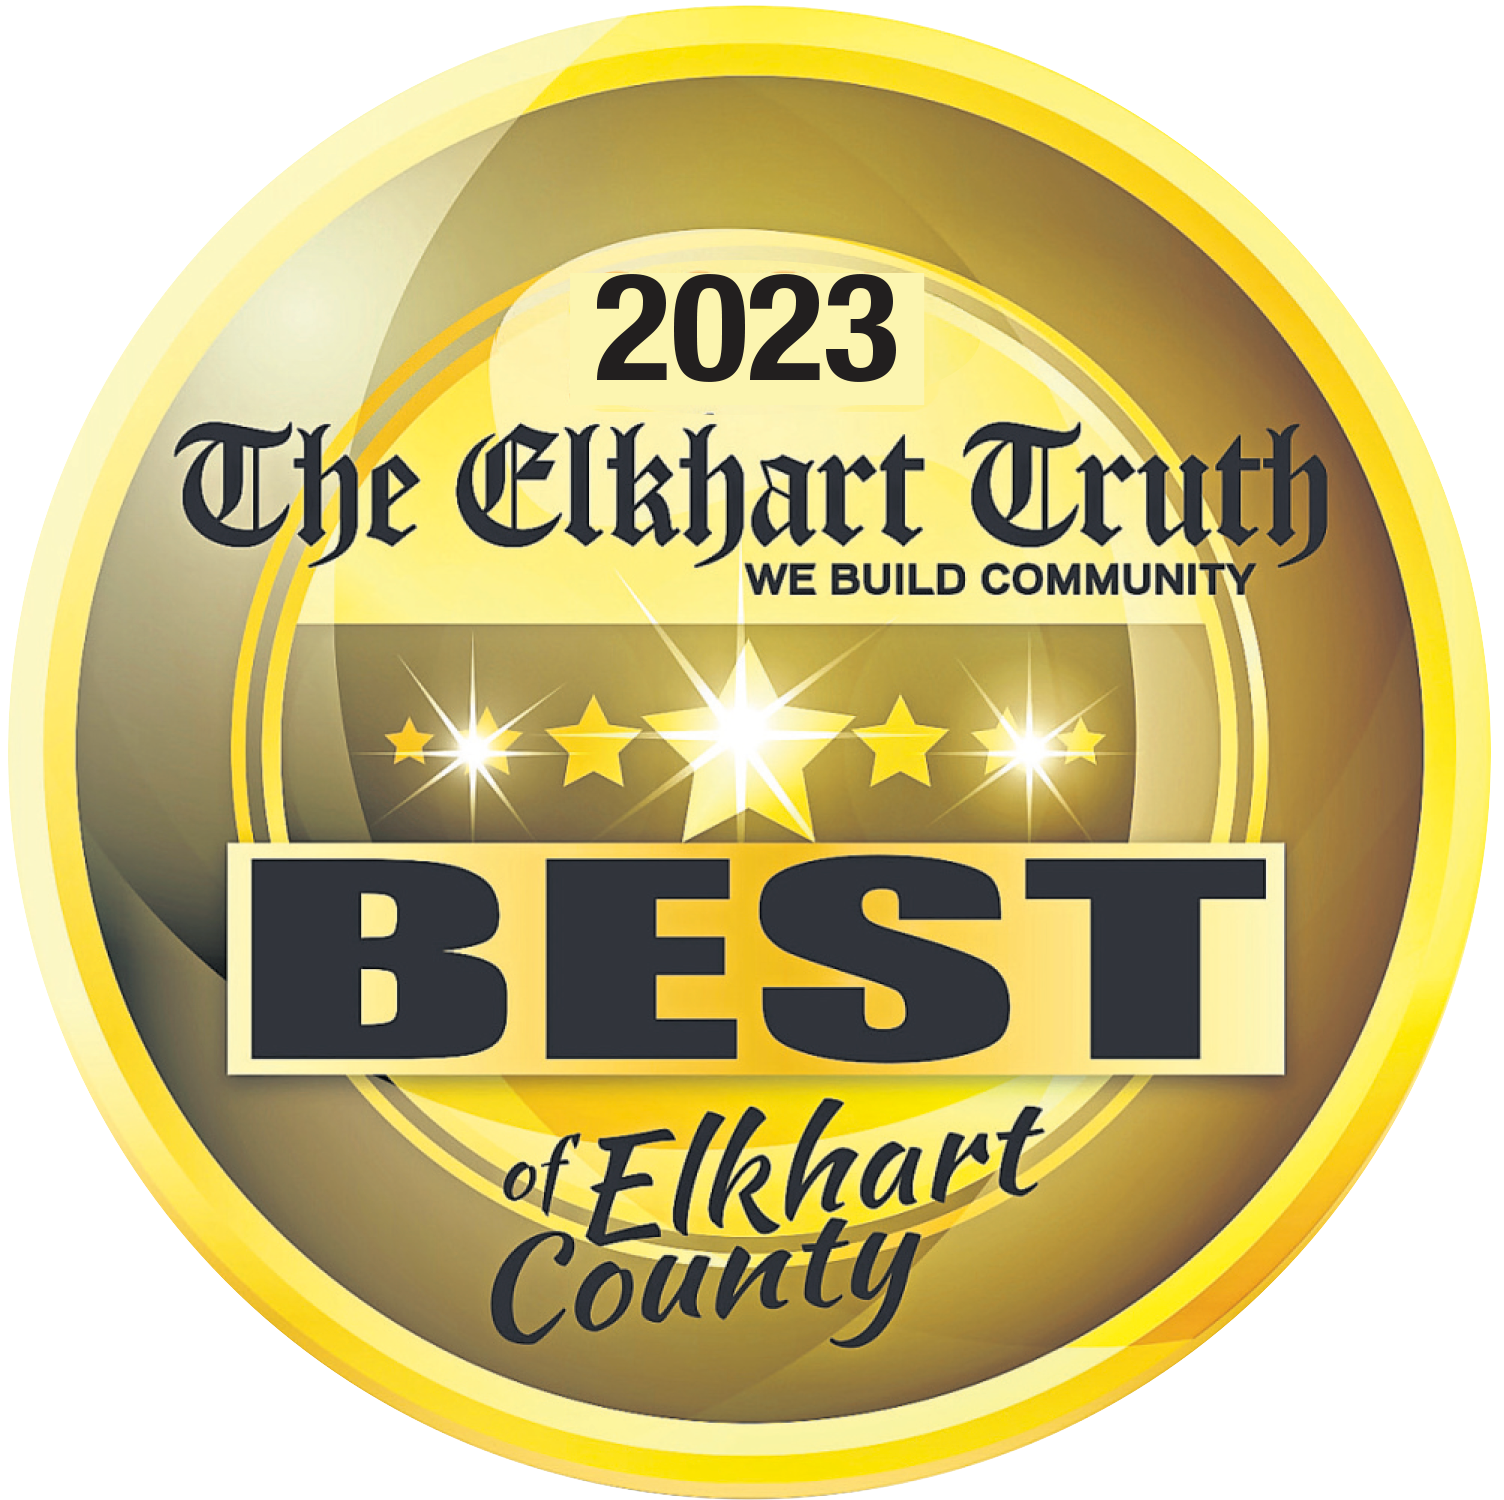 a badge that says best of elkhart county on it